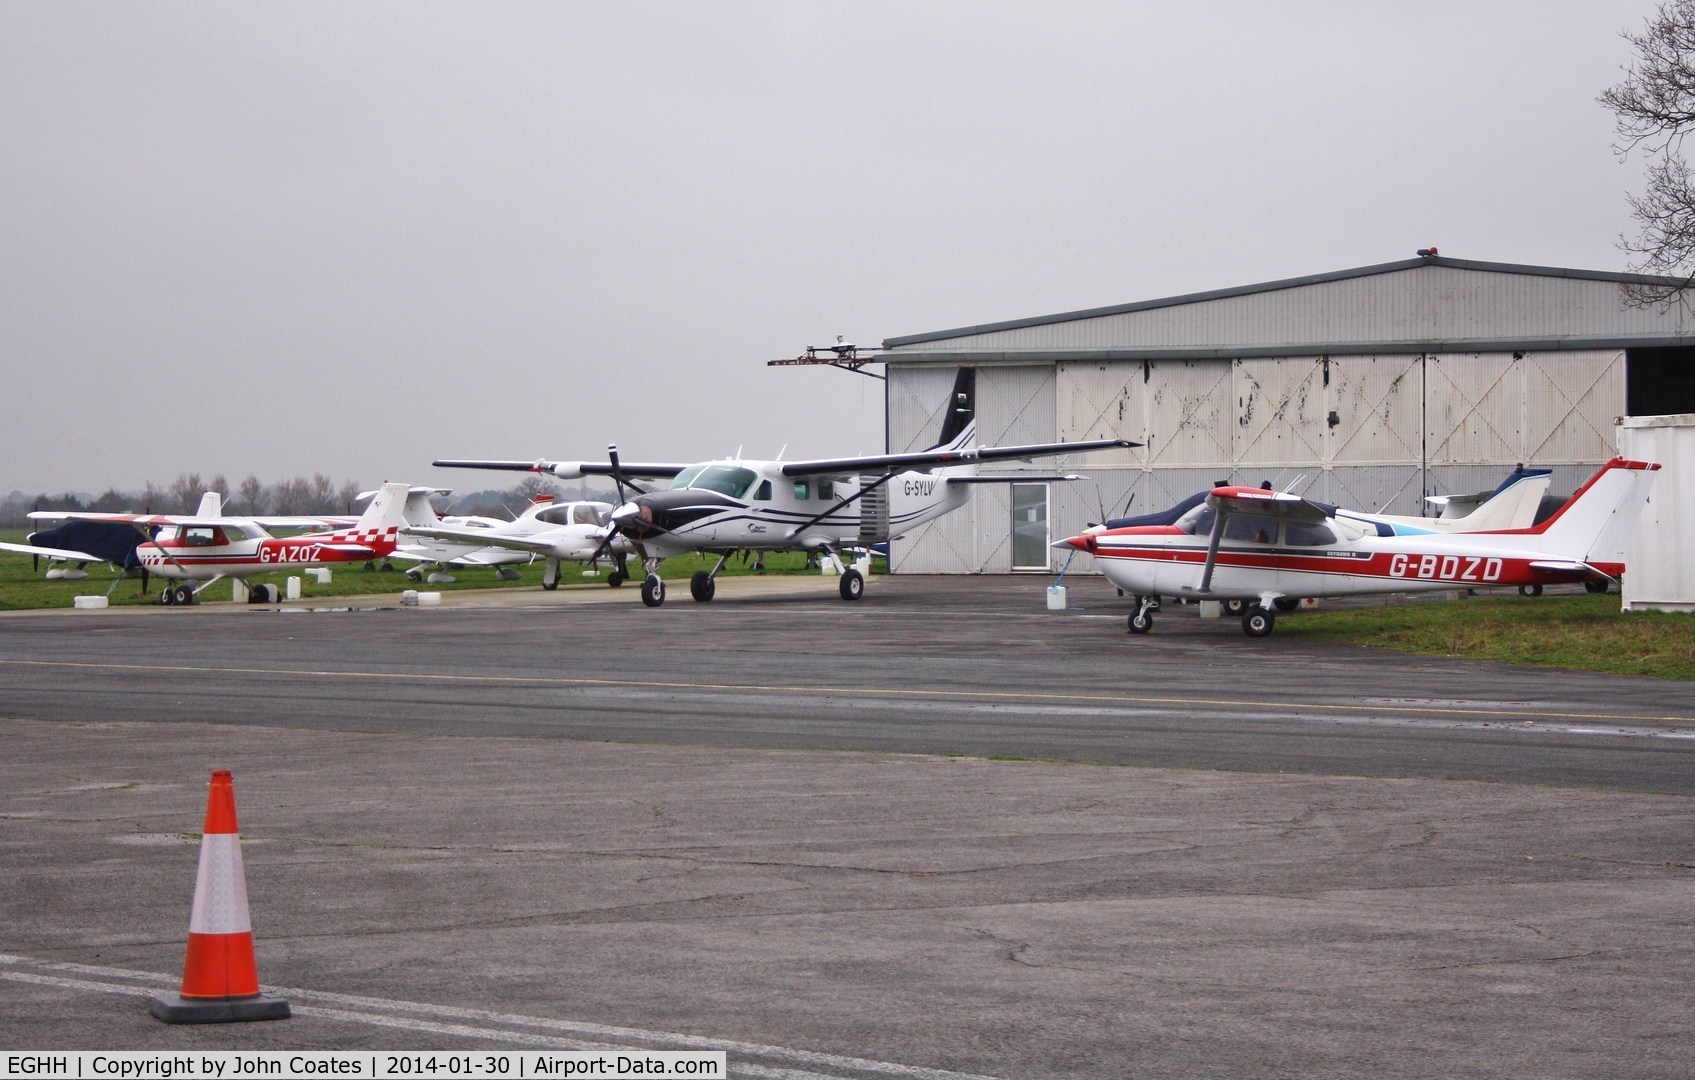 Bournemouth Airport, Bournemouth, England United Kingdom (EGHH) - Mixed bag at Worldwide apron.